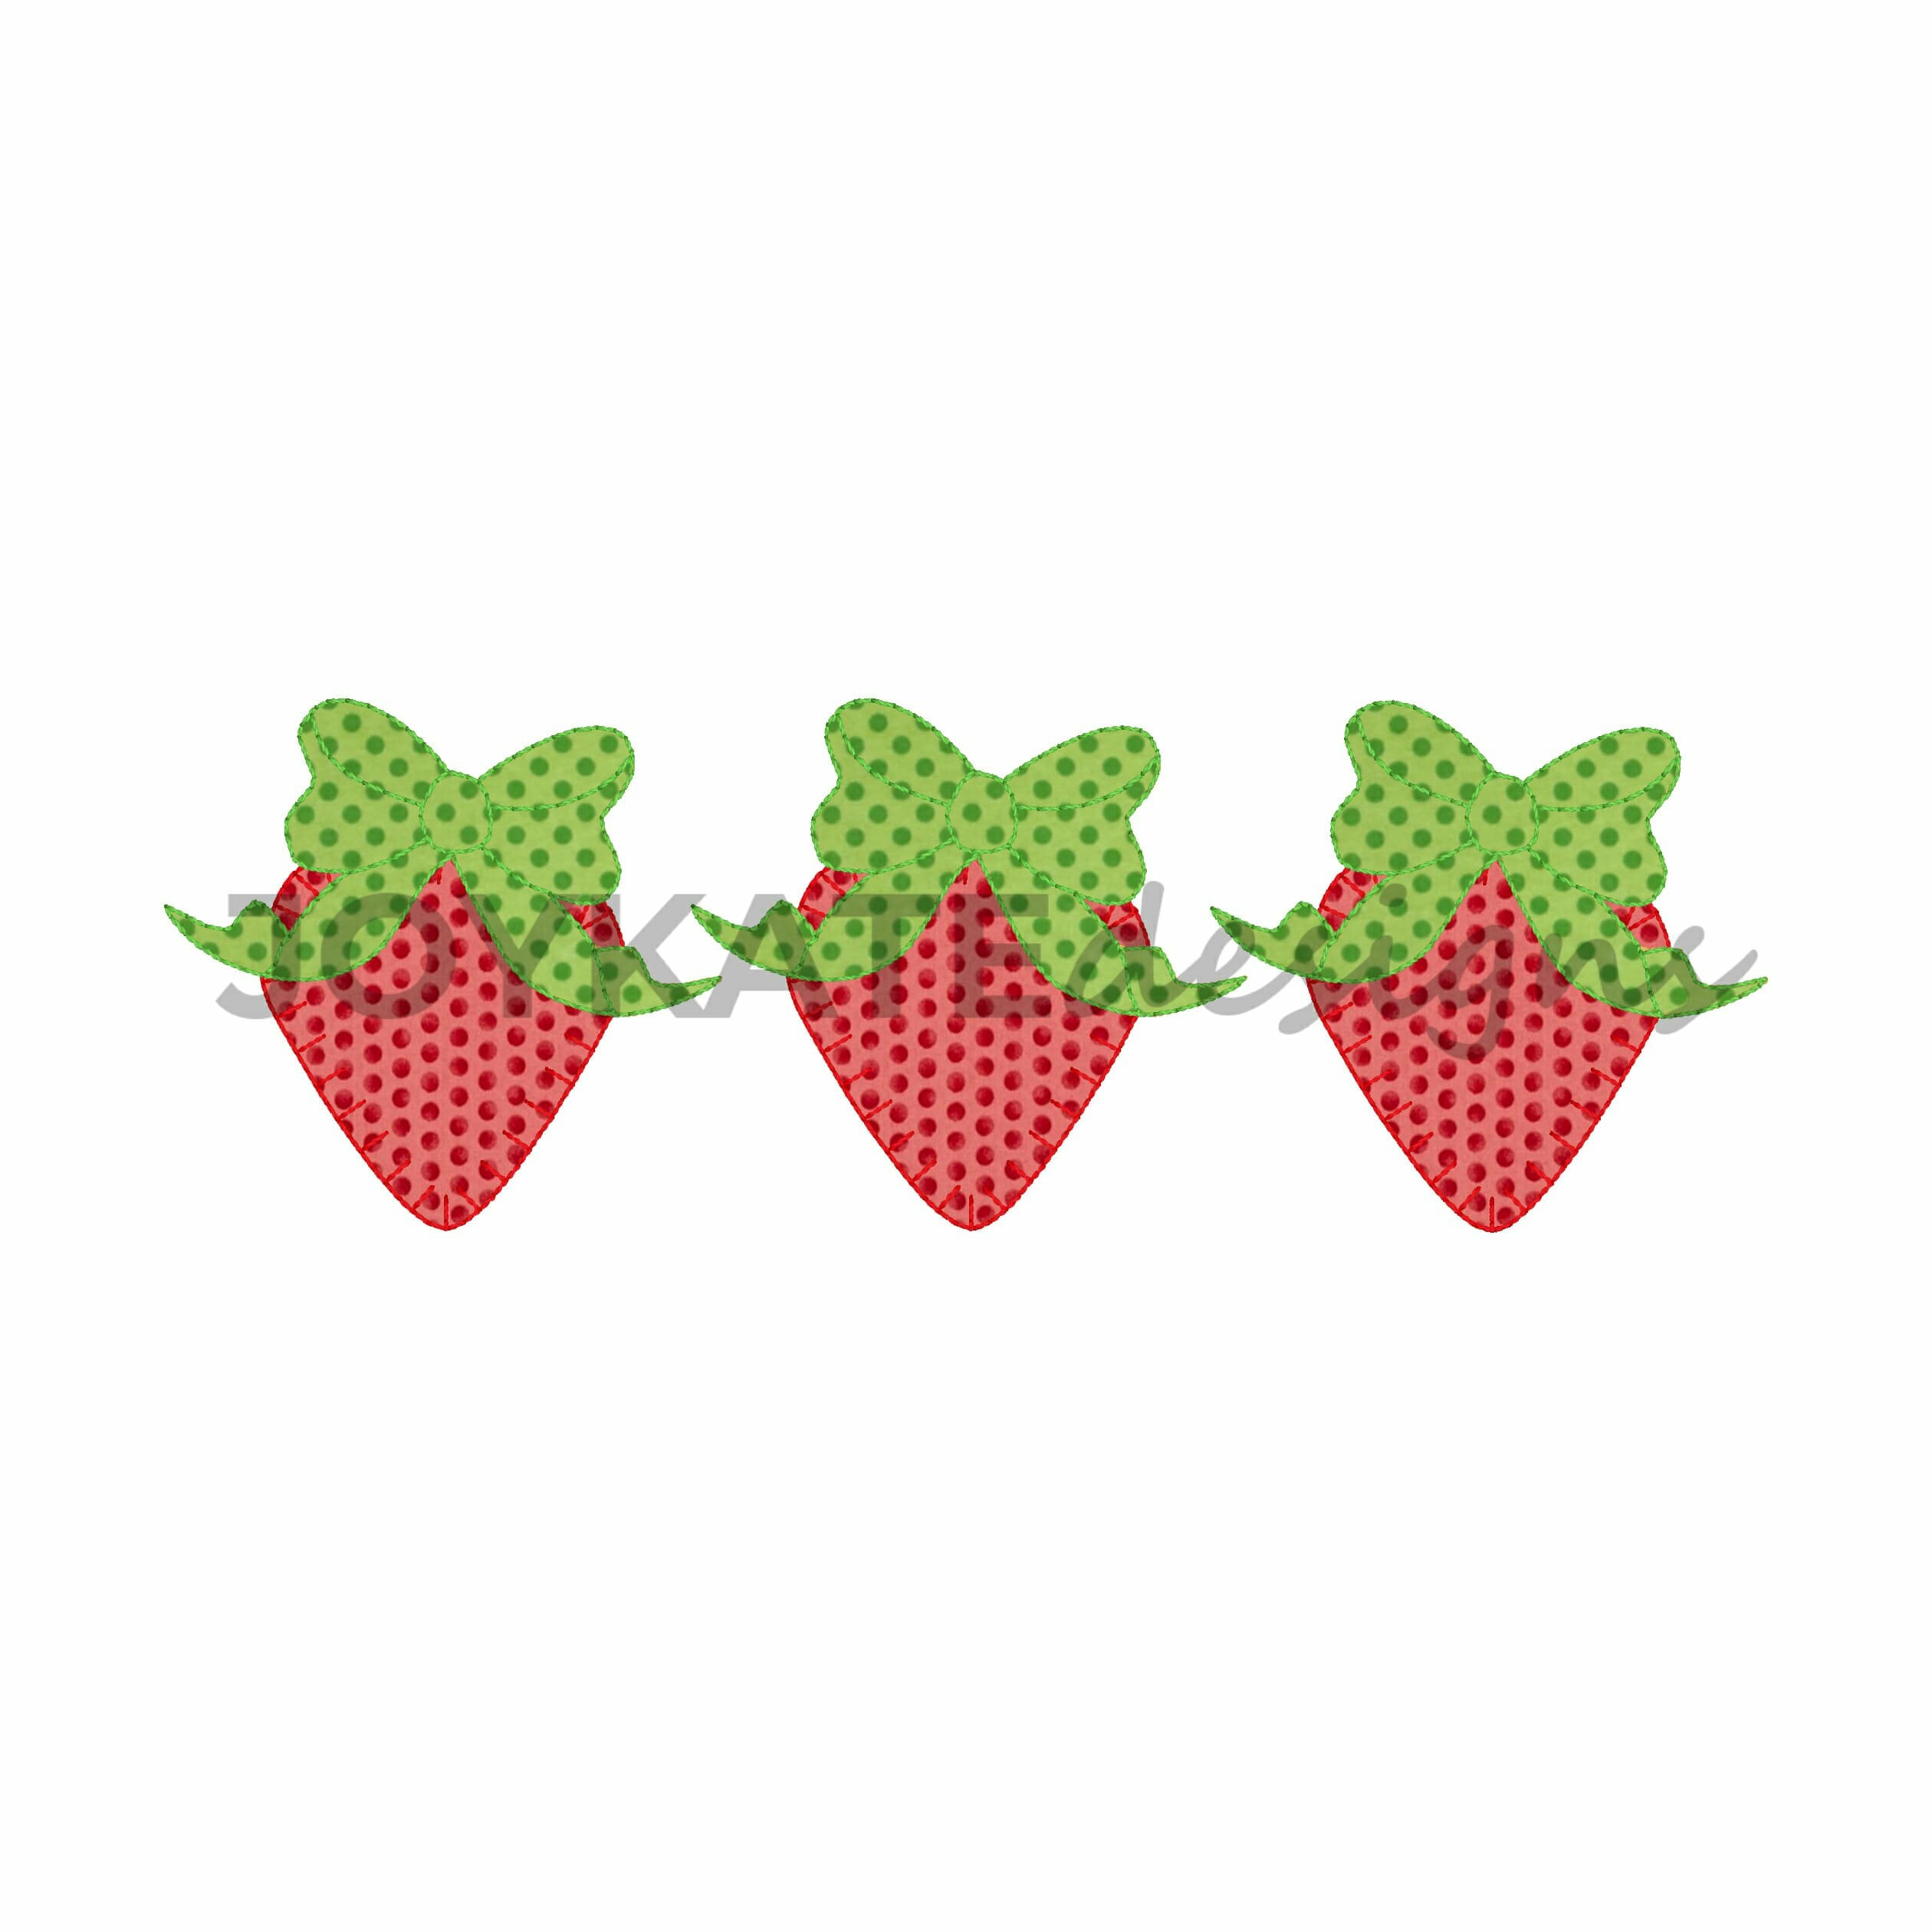 Strawberry Embroidery Pattern Strawberry With Bow Trio Applique Embroidery Design